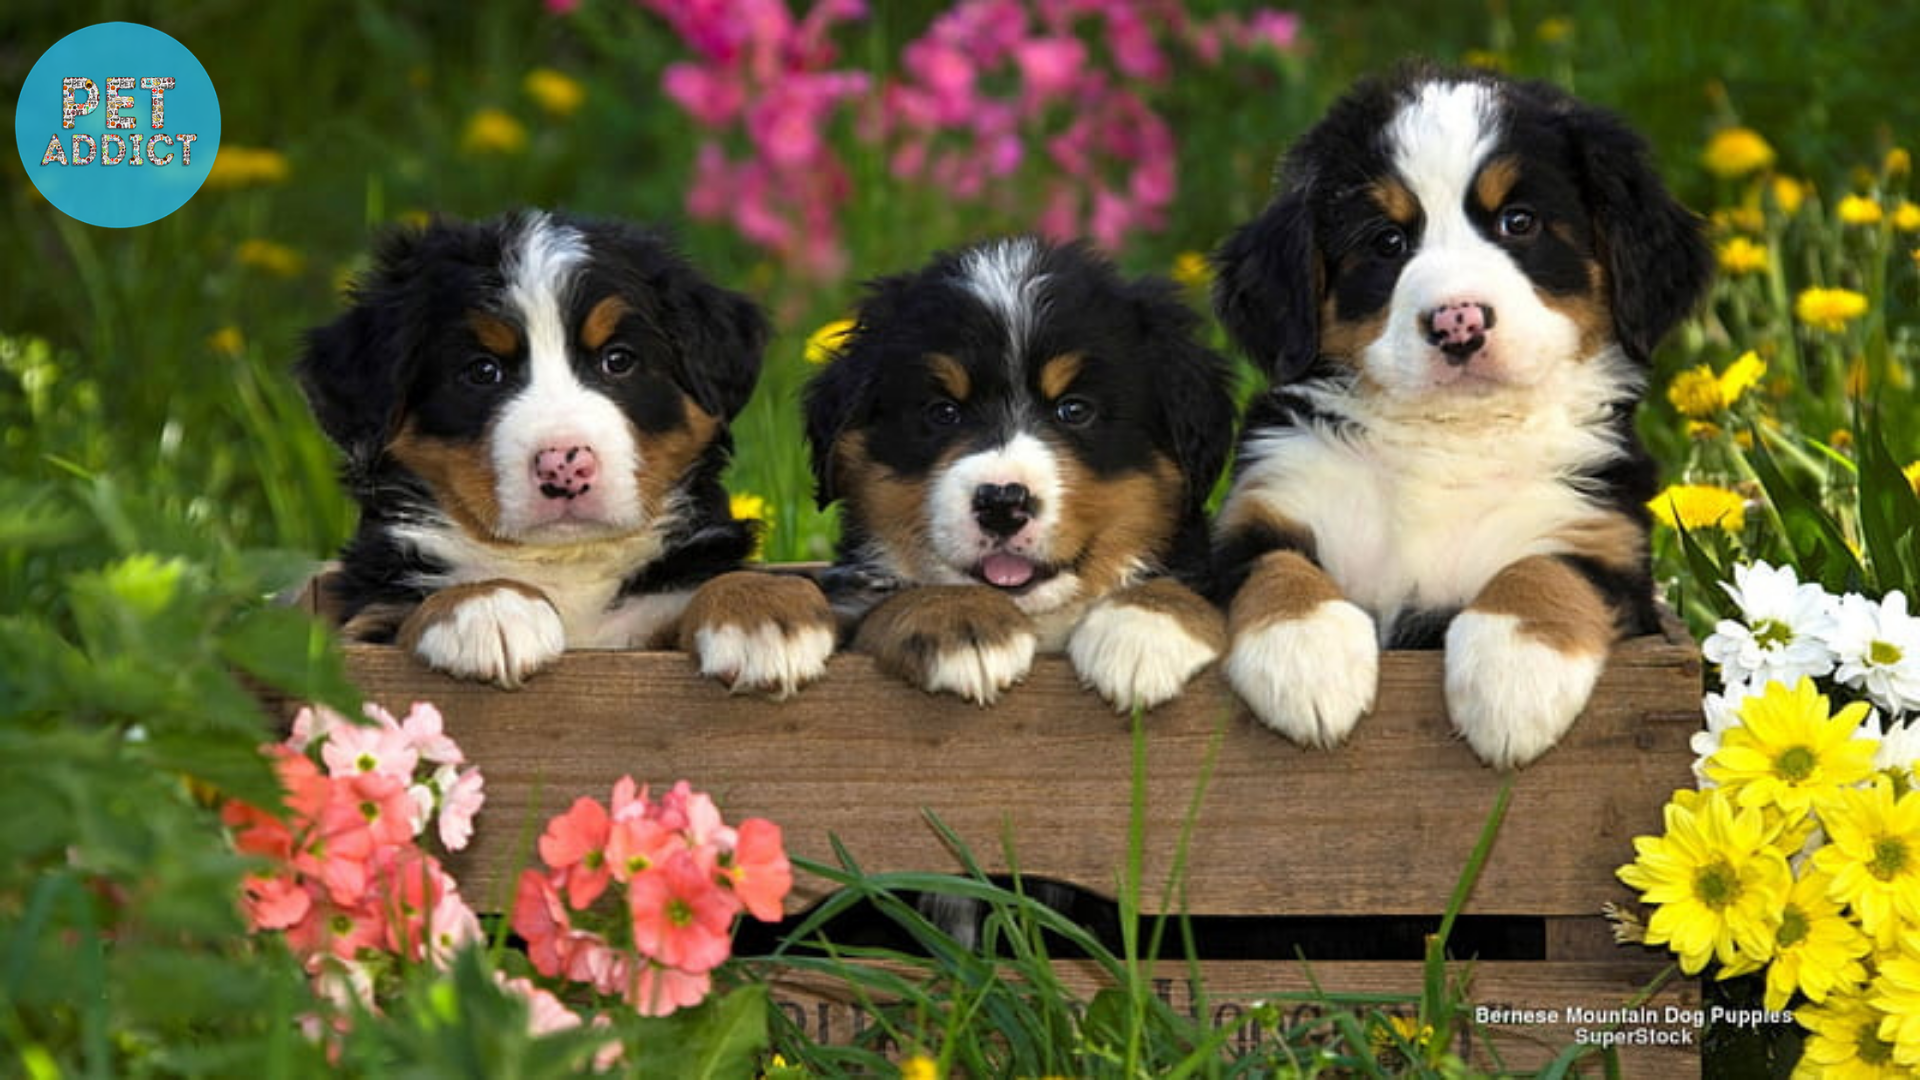 Temperament and Personality Traits of Bernese Mountain Dog Puppies